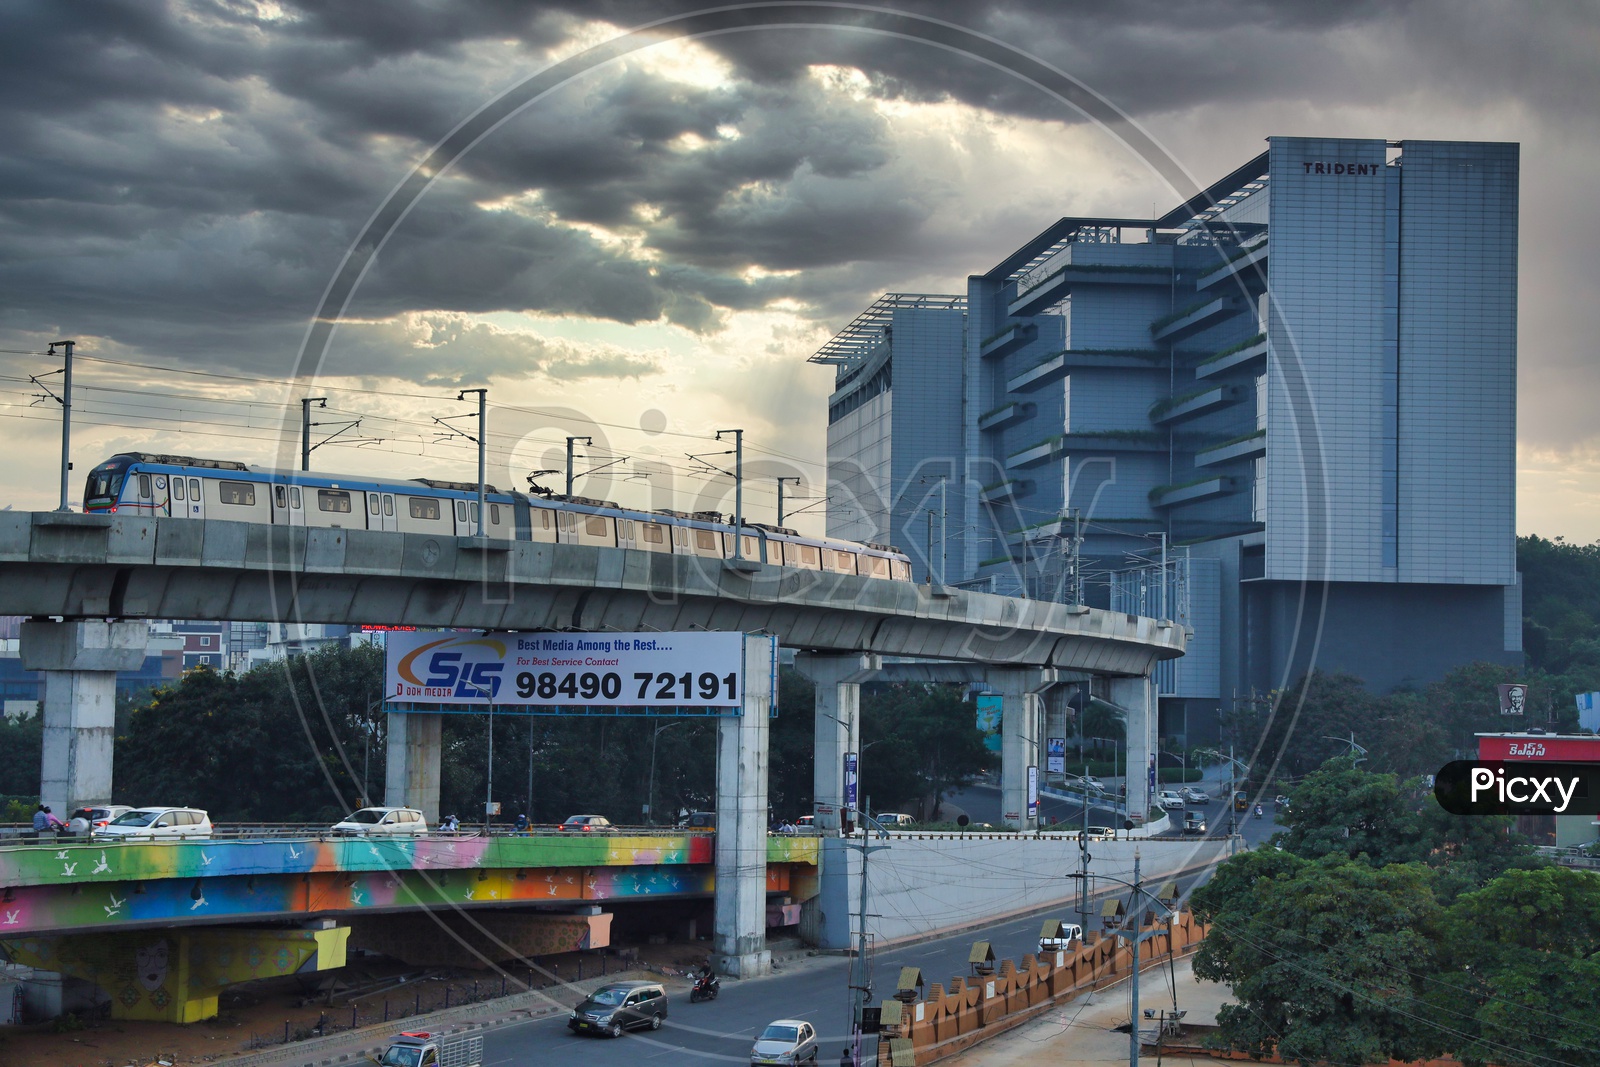 Hyderabad Metro Train With trident Hotel In Background